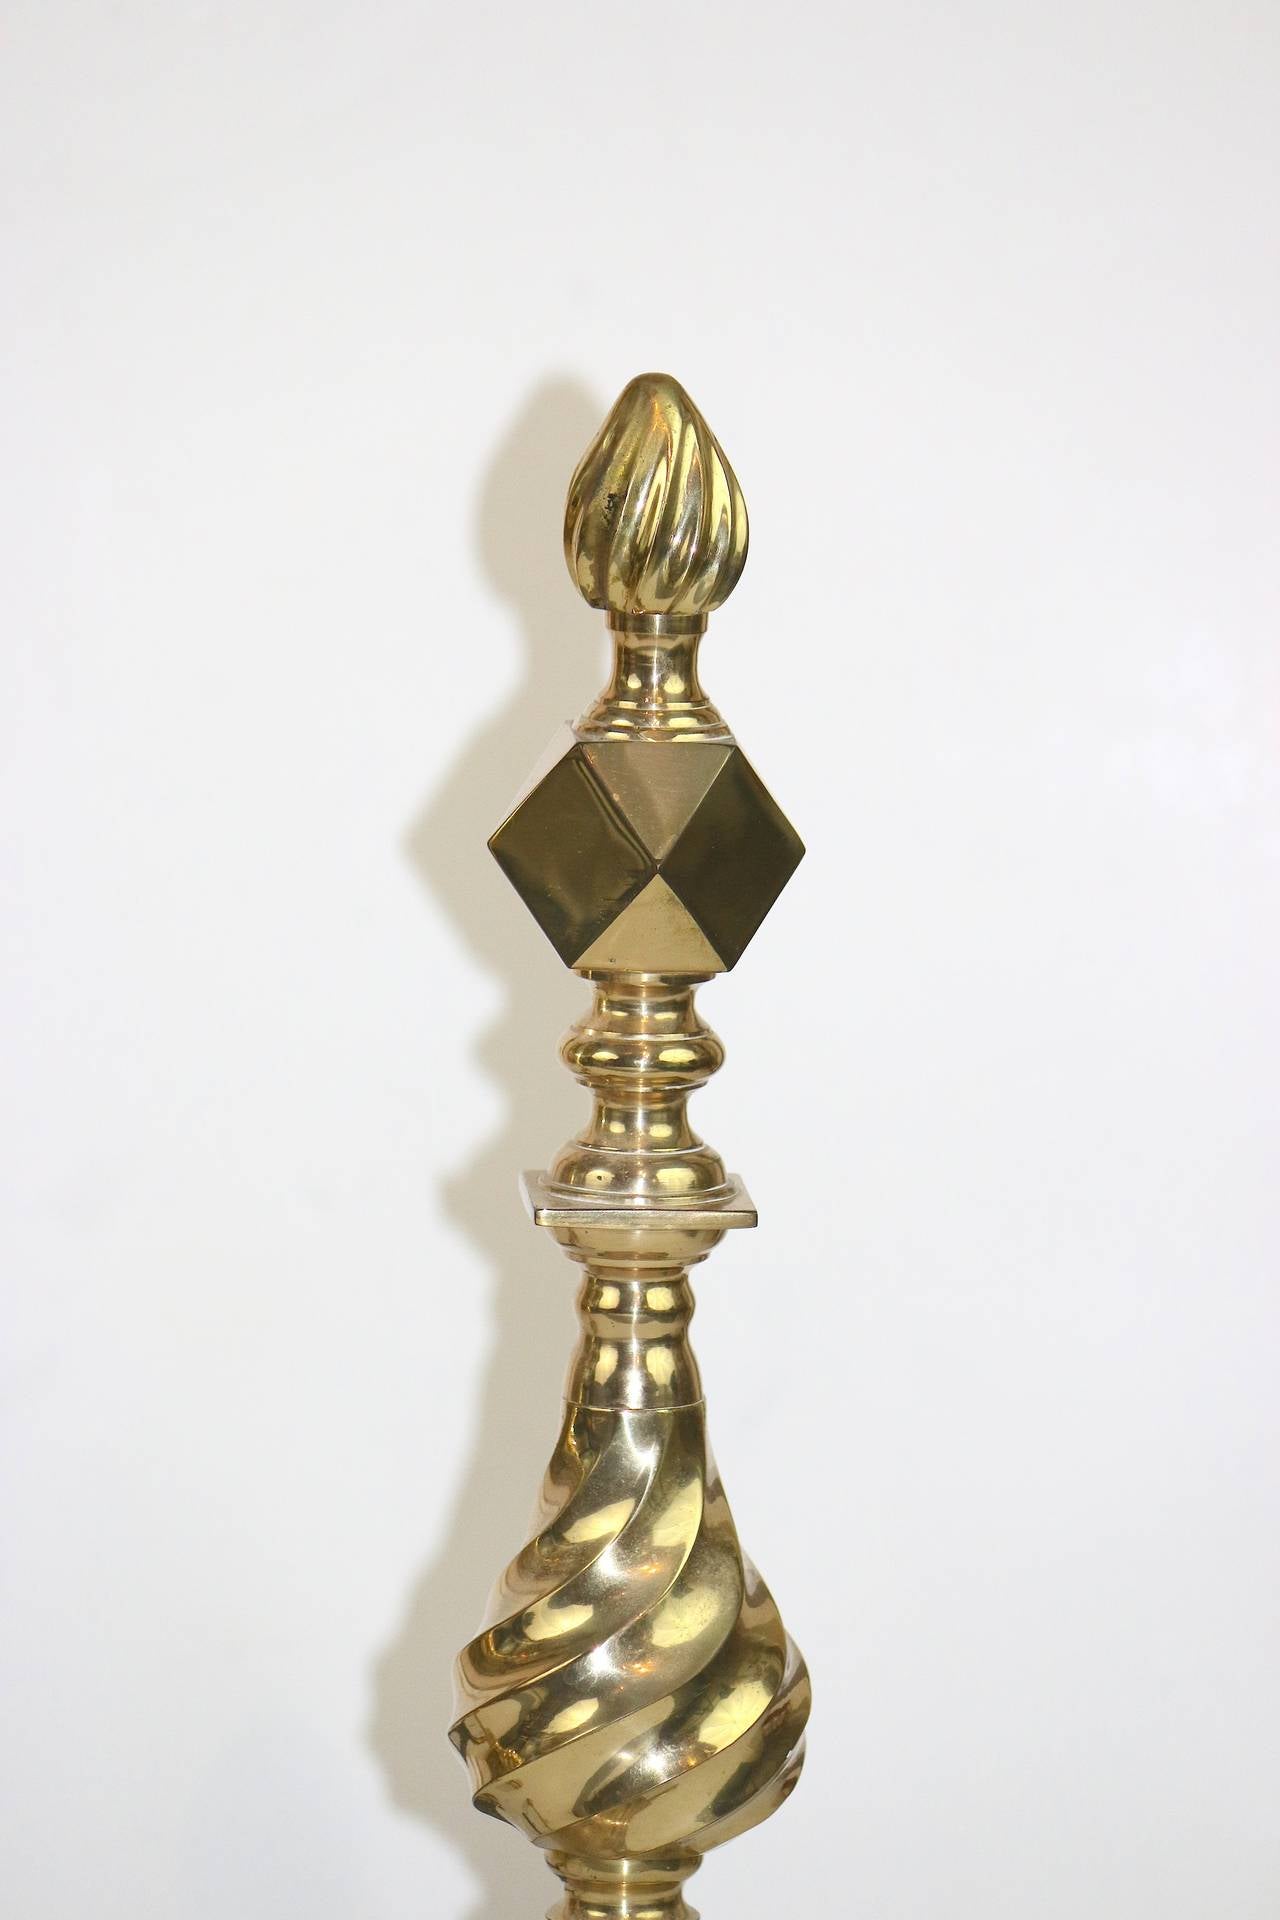 Pair of Polished American Classical Flame-Top Finial Brass Andirons In Good Condition For Sale In West Palm Beach, FL